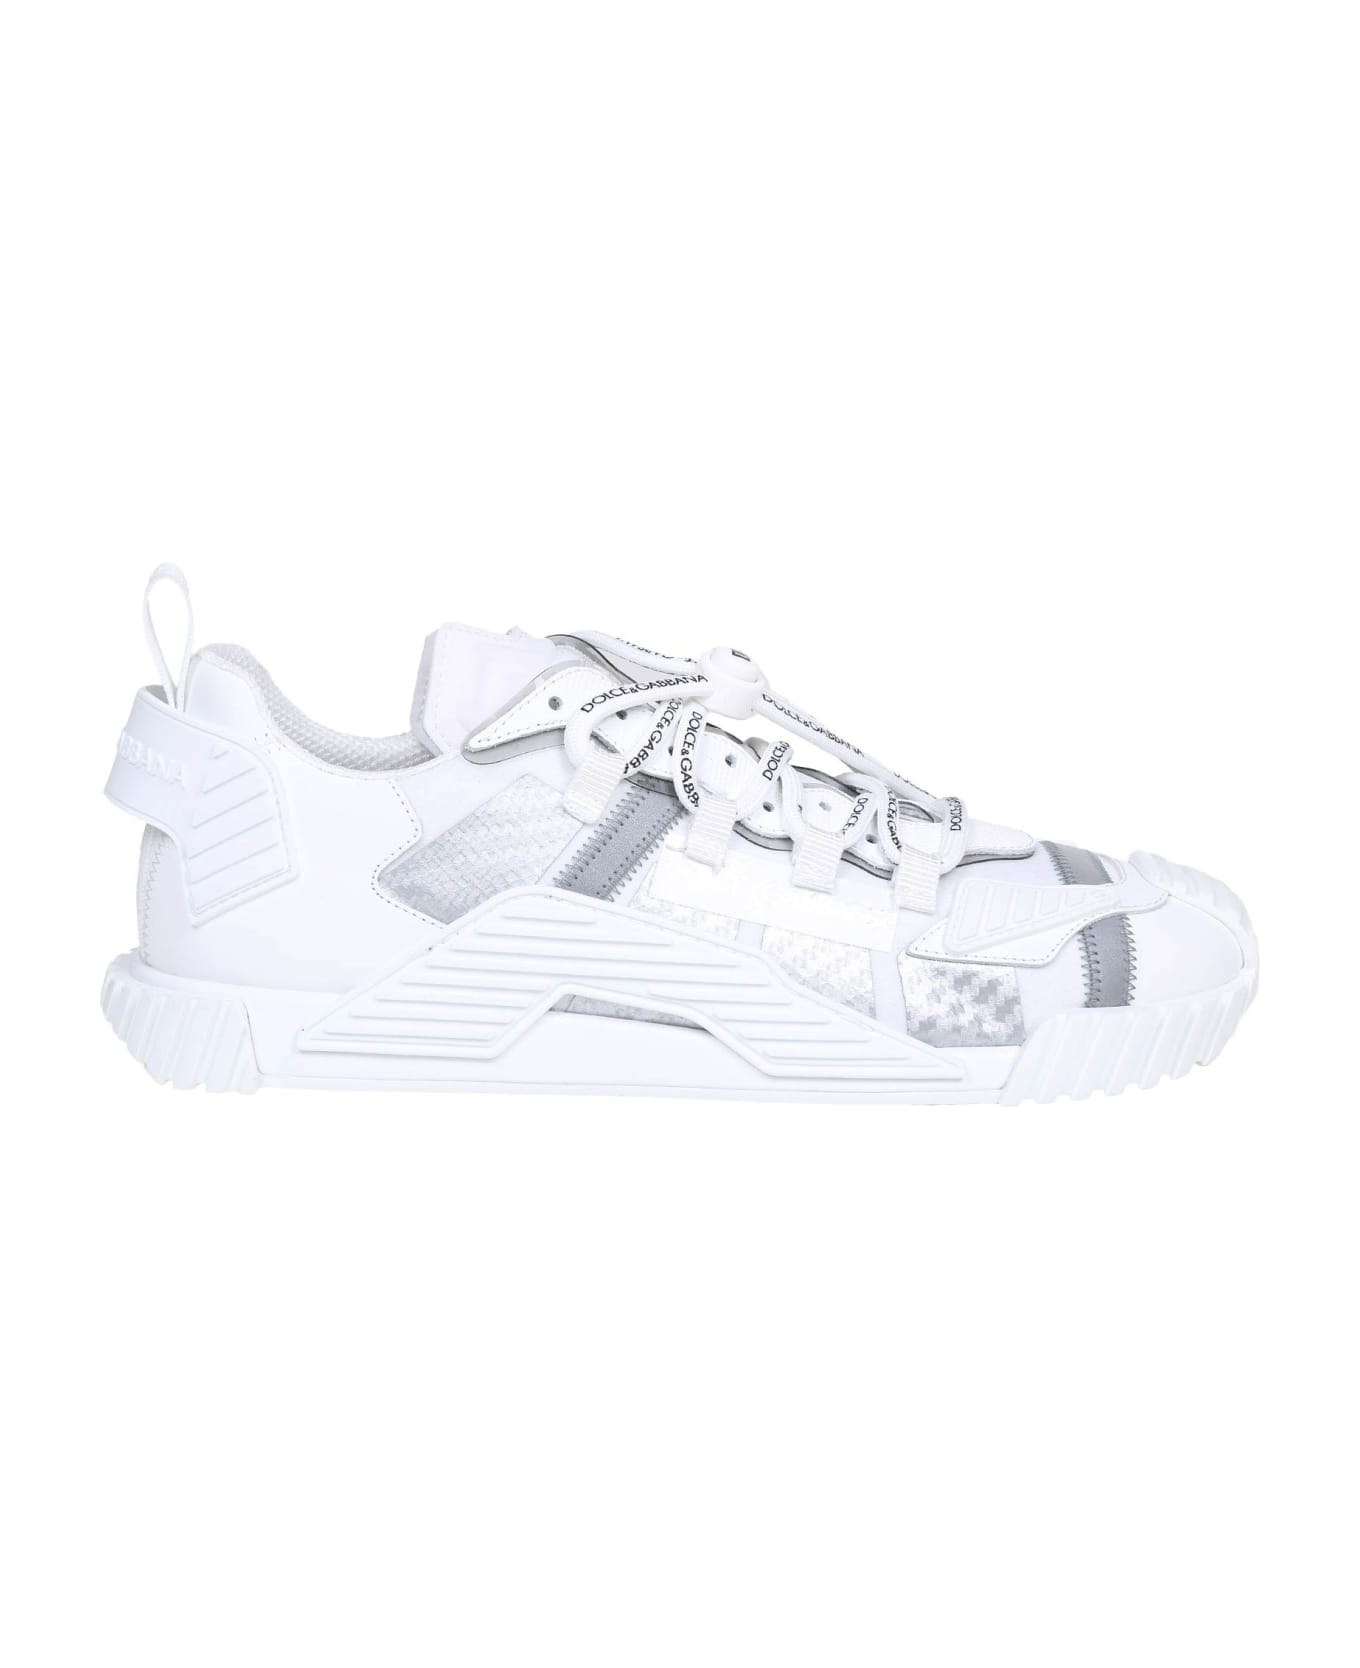 Dolce & Gabbana Sneakers Ns1 In Leather, Mesh And Suede - WHITE